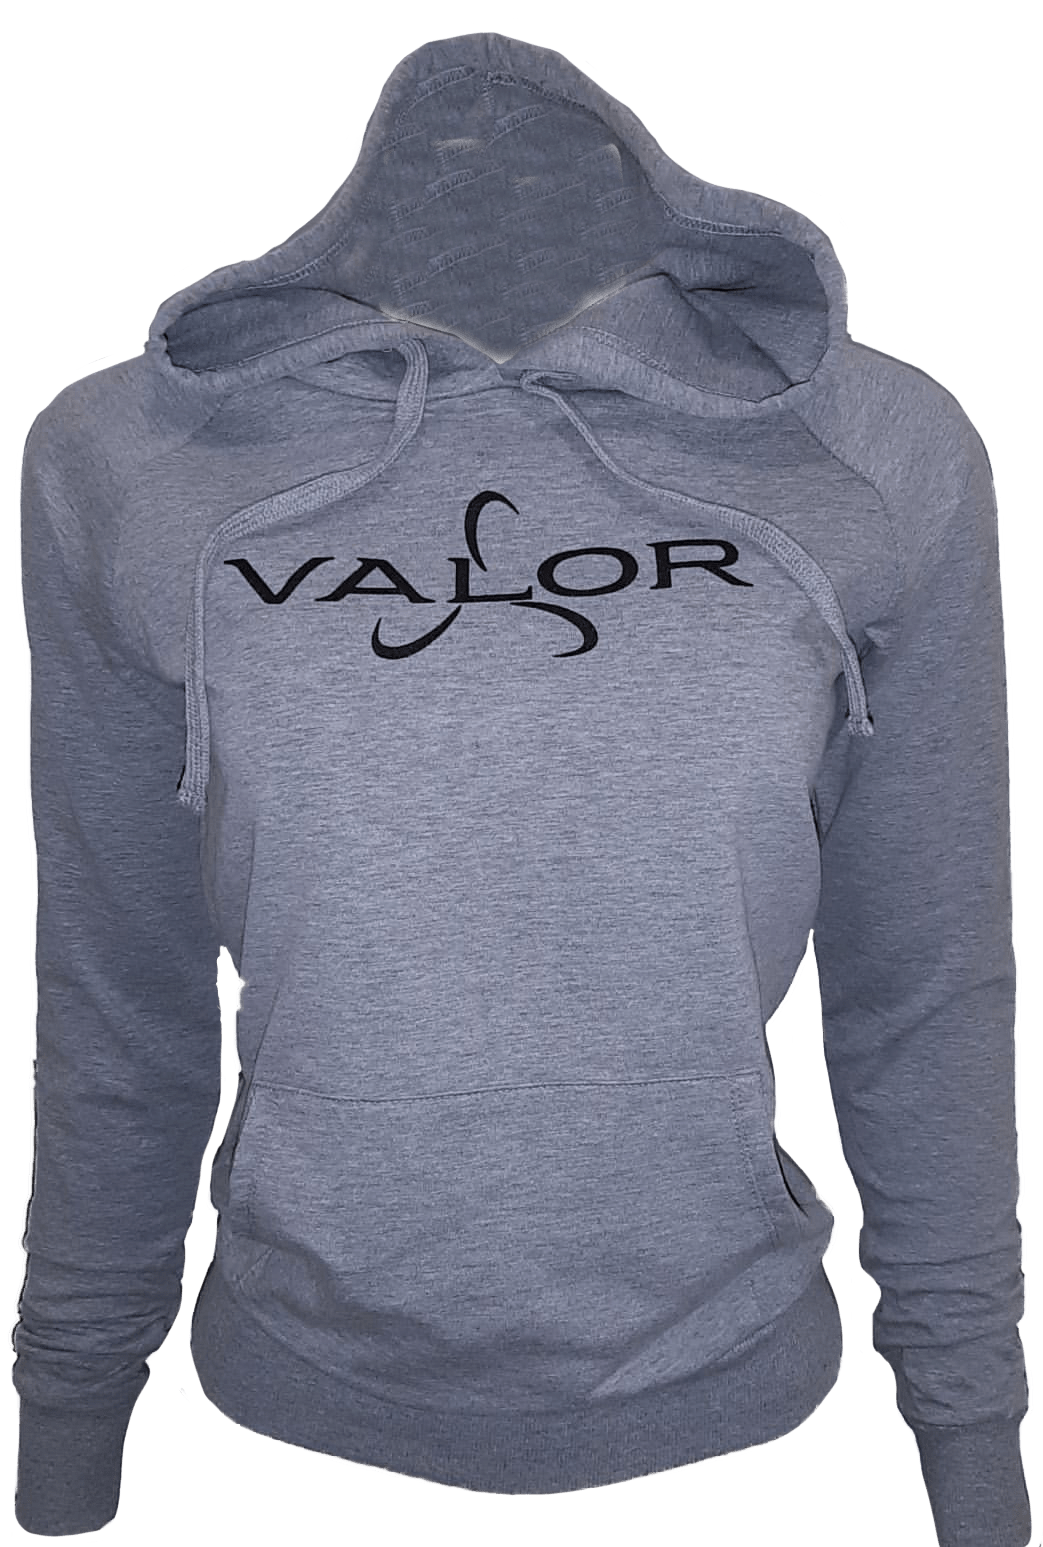 VALOR YOUTH HOODIE 